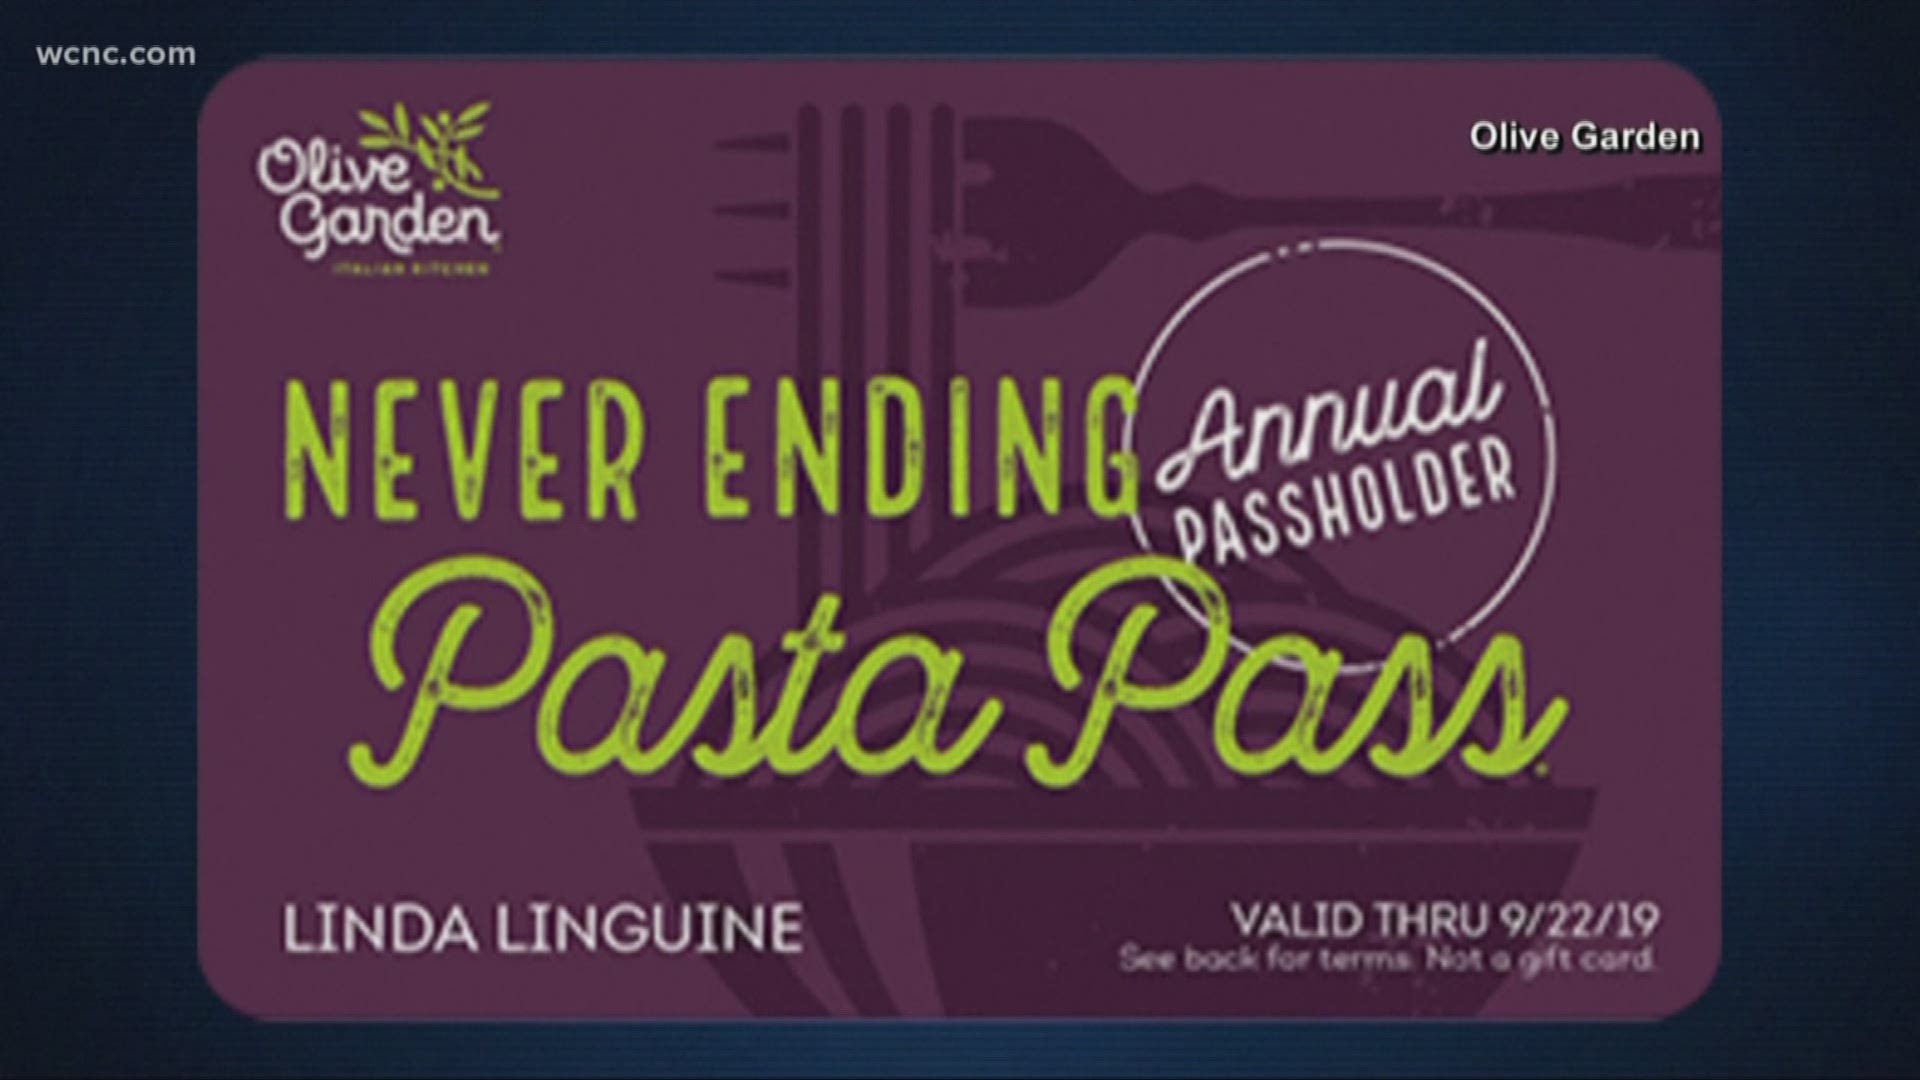 Olive Garden lovers, listen up! The Italian chain is offering its never ending pasta pass this week, including some year-round passes!